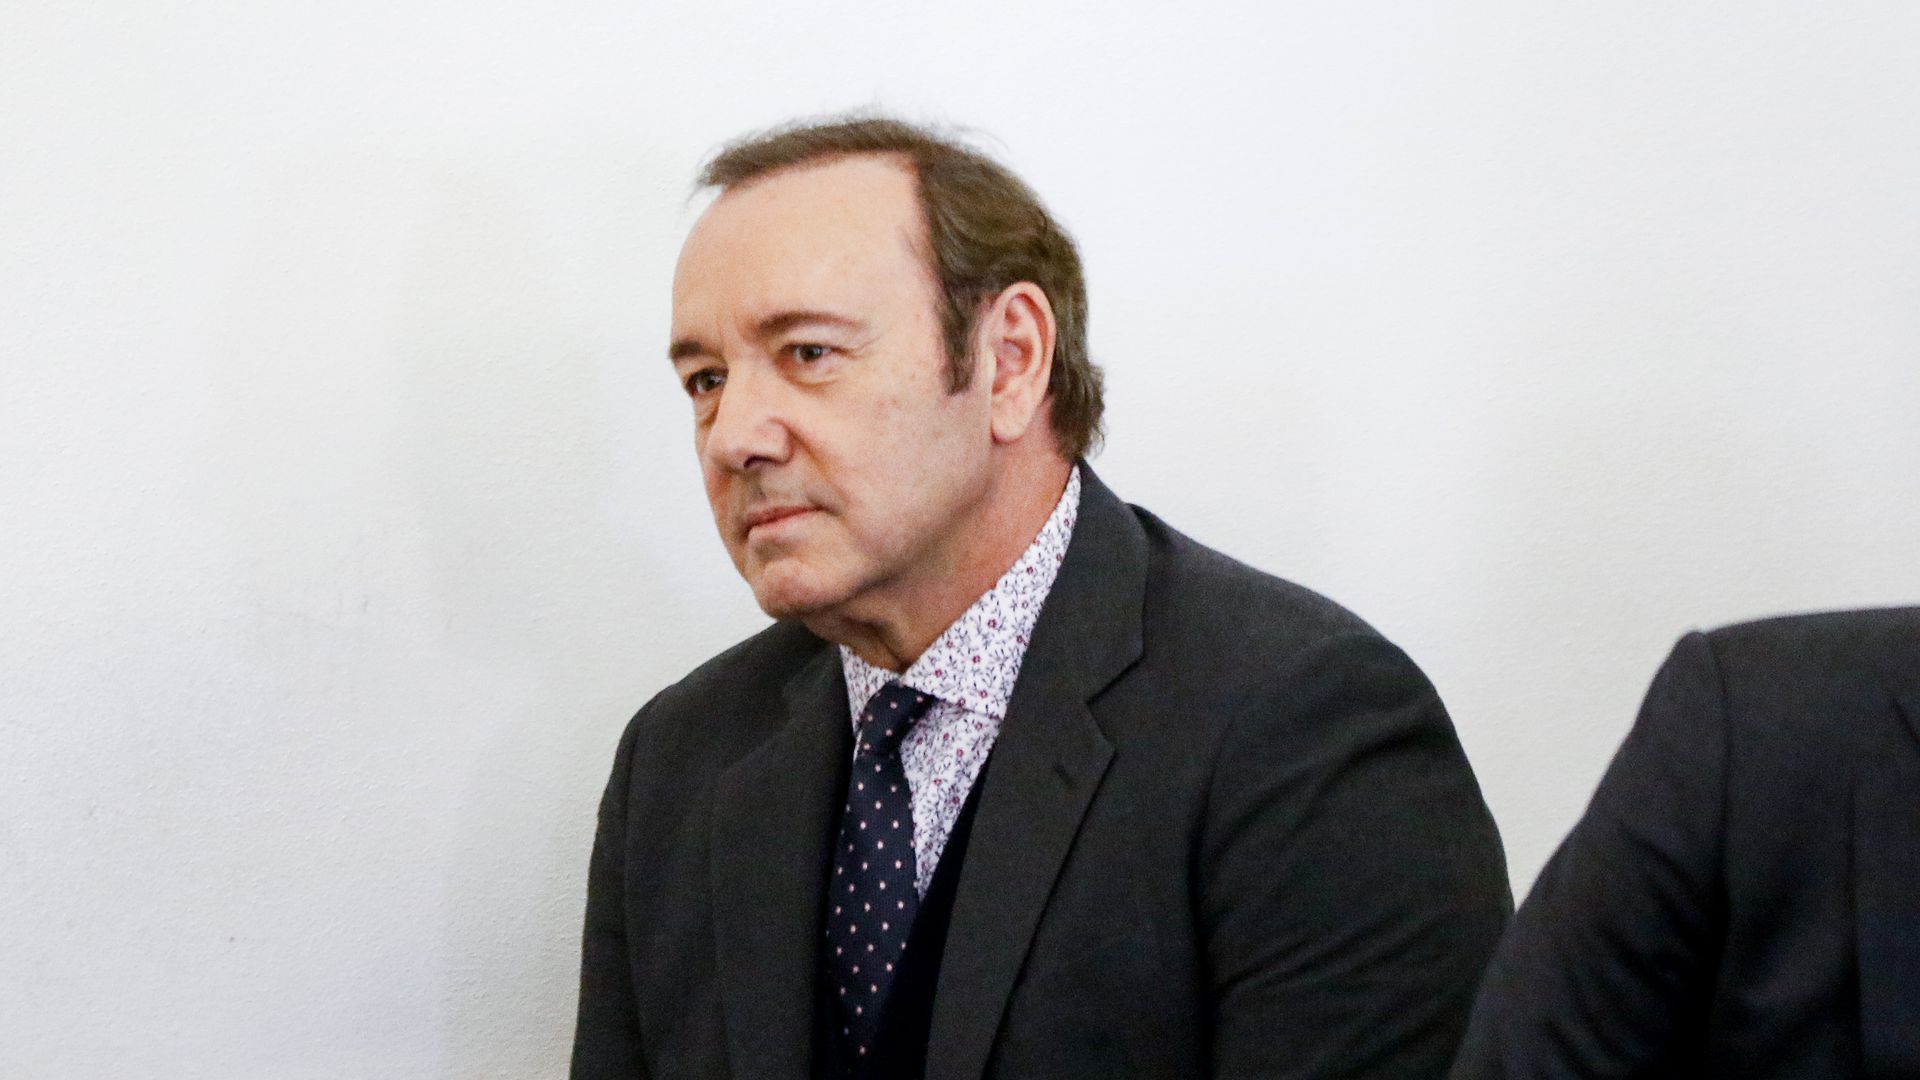 Sexual assault: Kevin Spacey set to appear in court this week